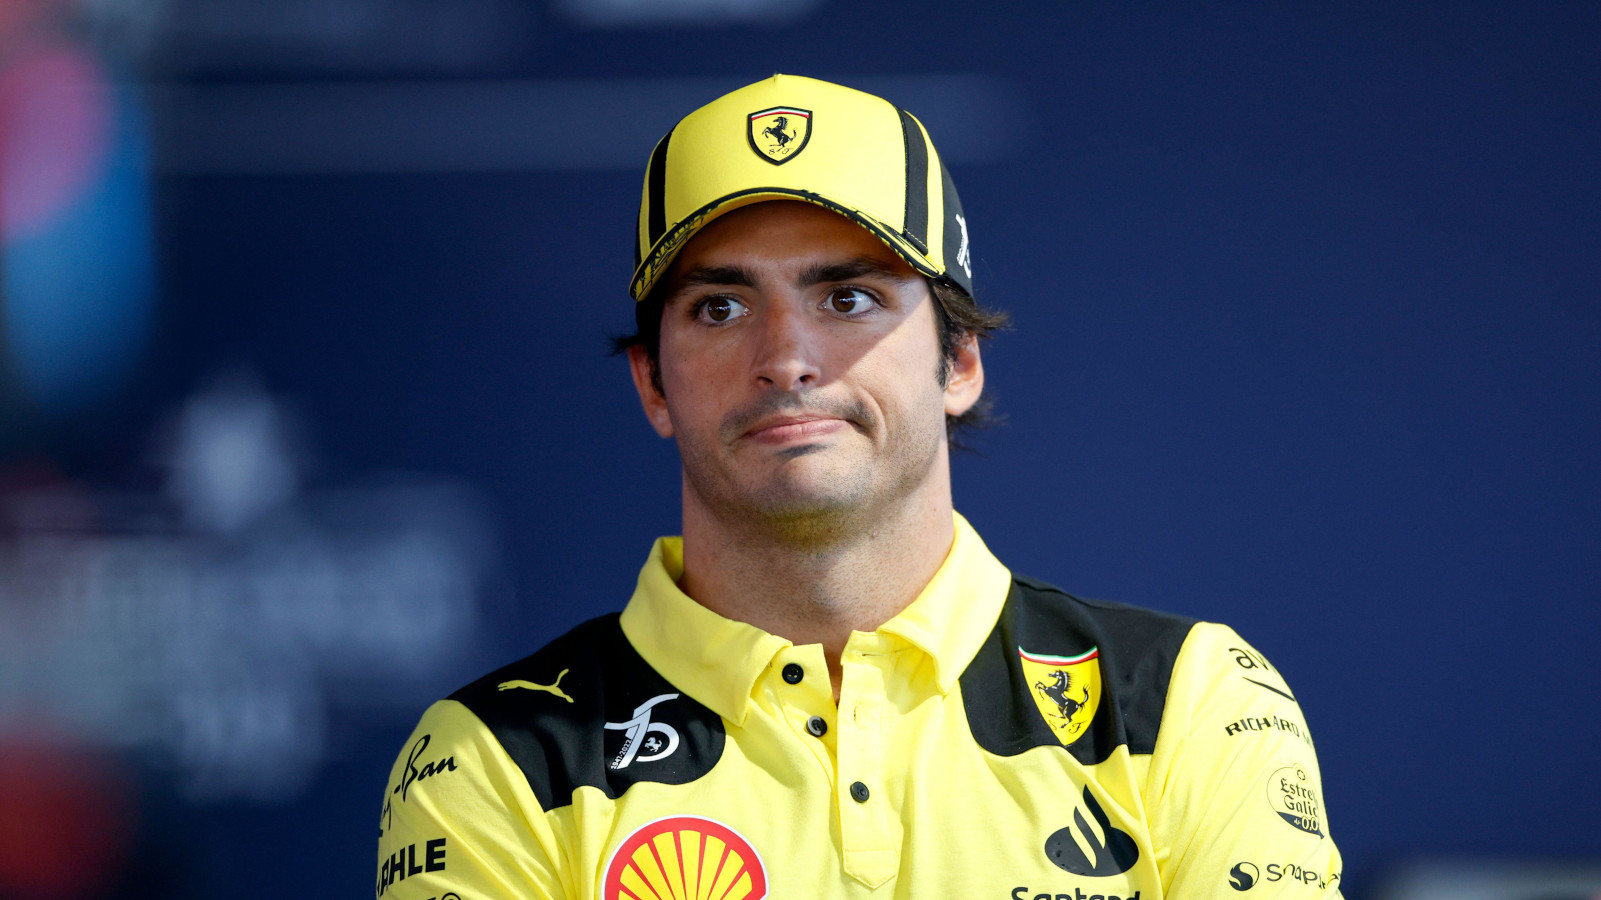 Carlos Sainz in the yellow for Ferrari's 75th. Italy September 2022